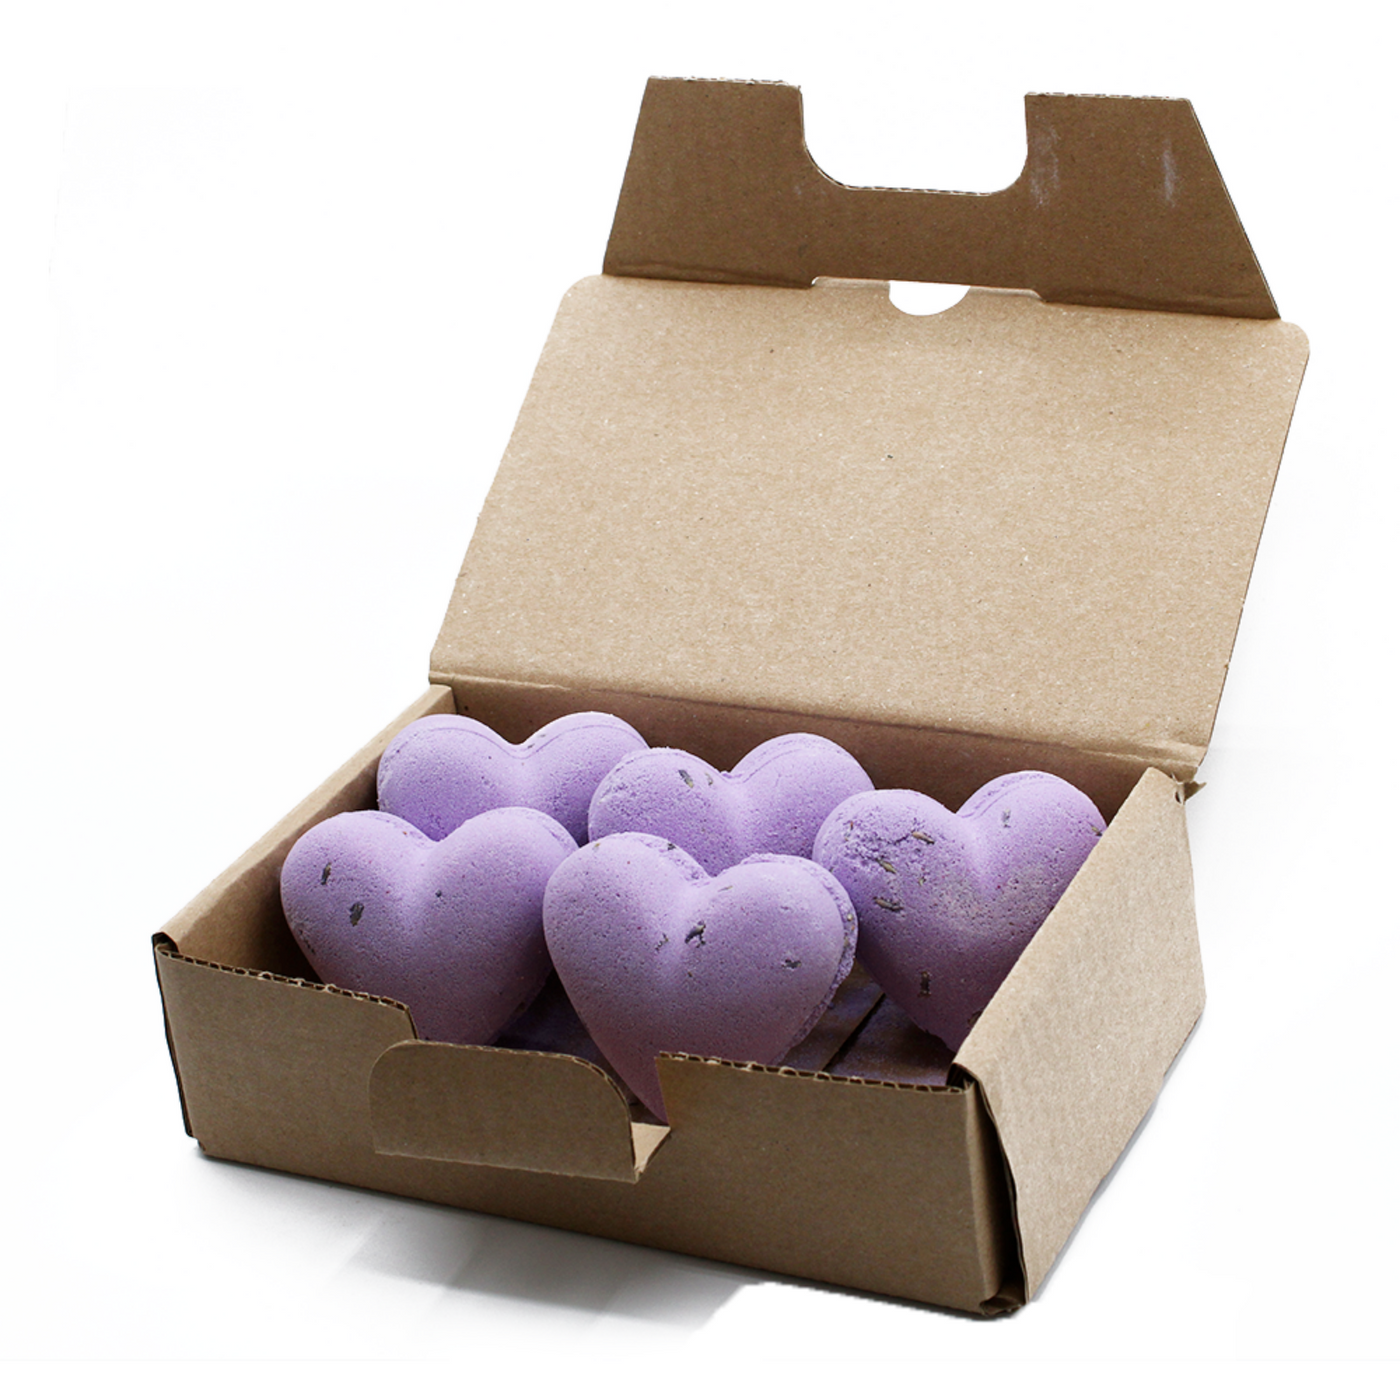 Box Of 5 French Lavender Love Heart Bath Bombs.